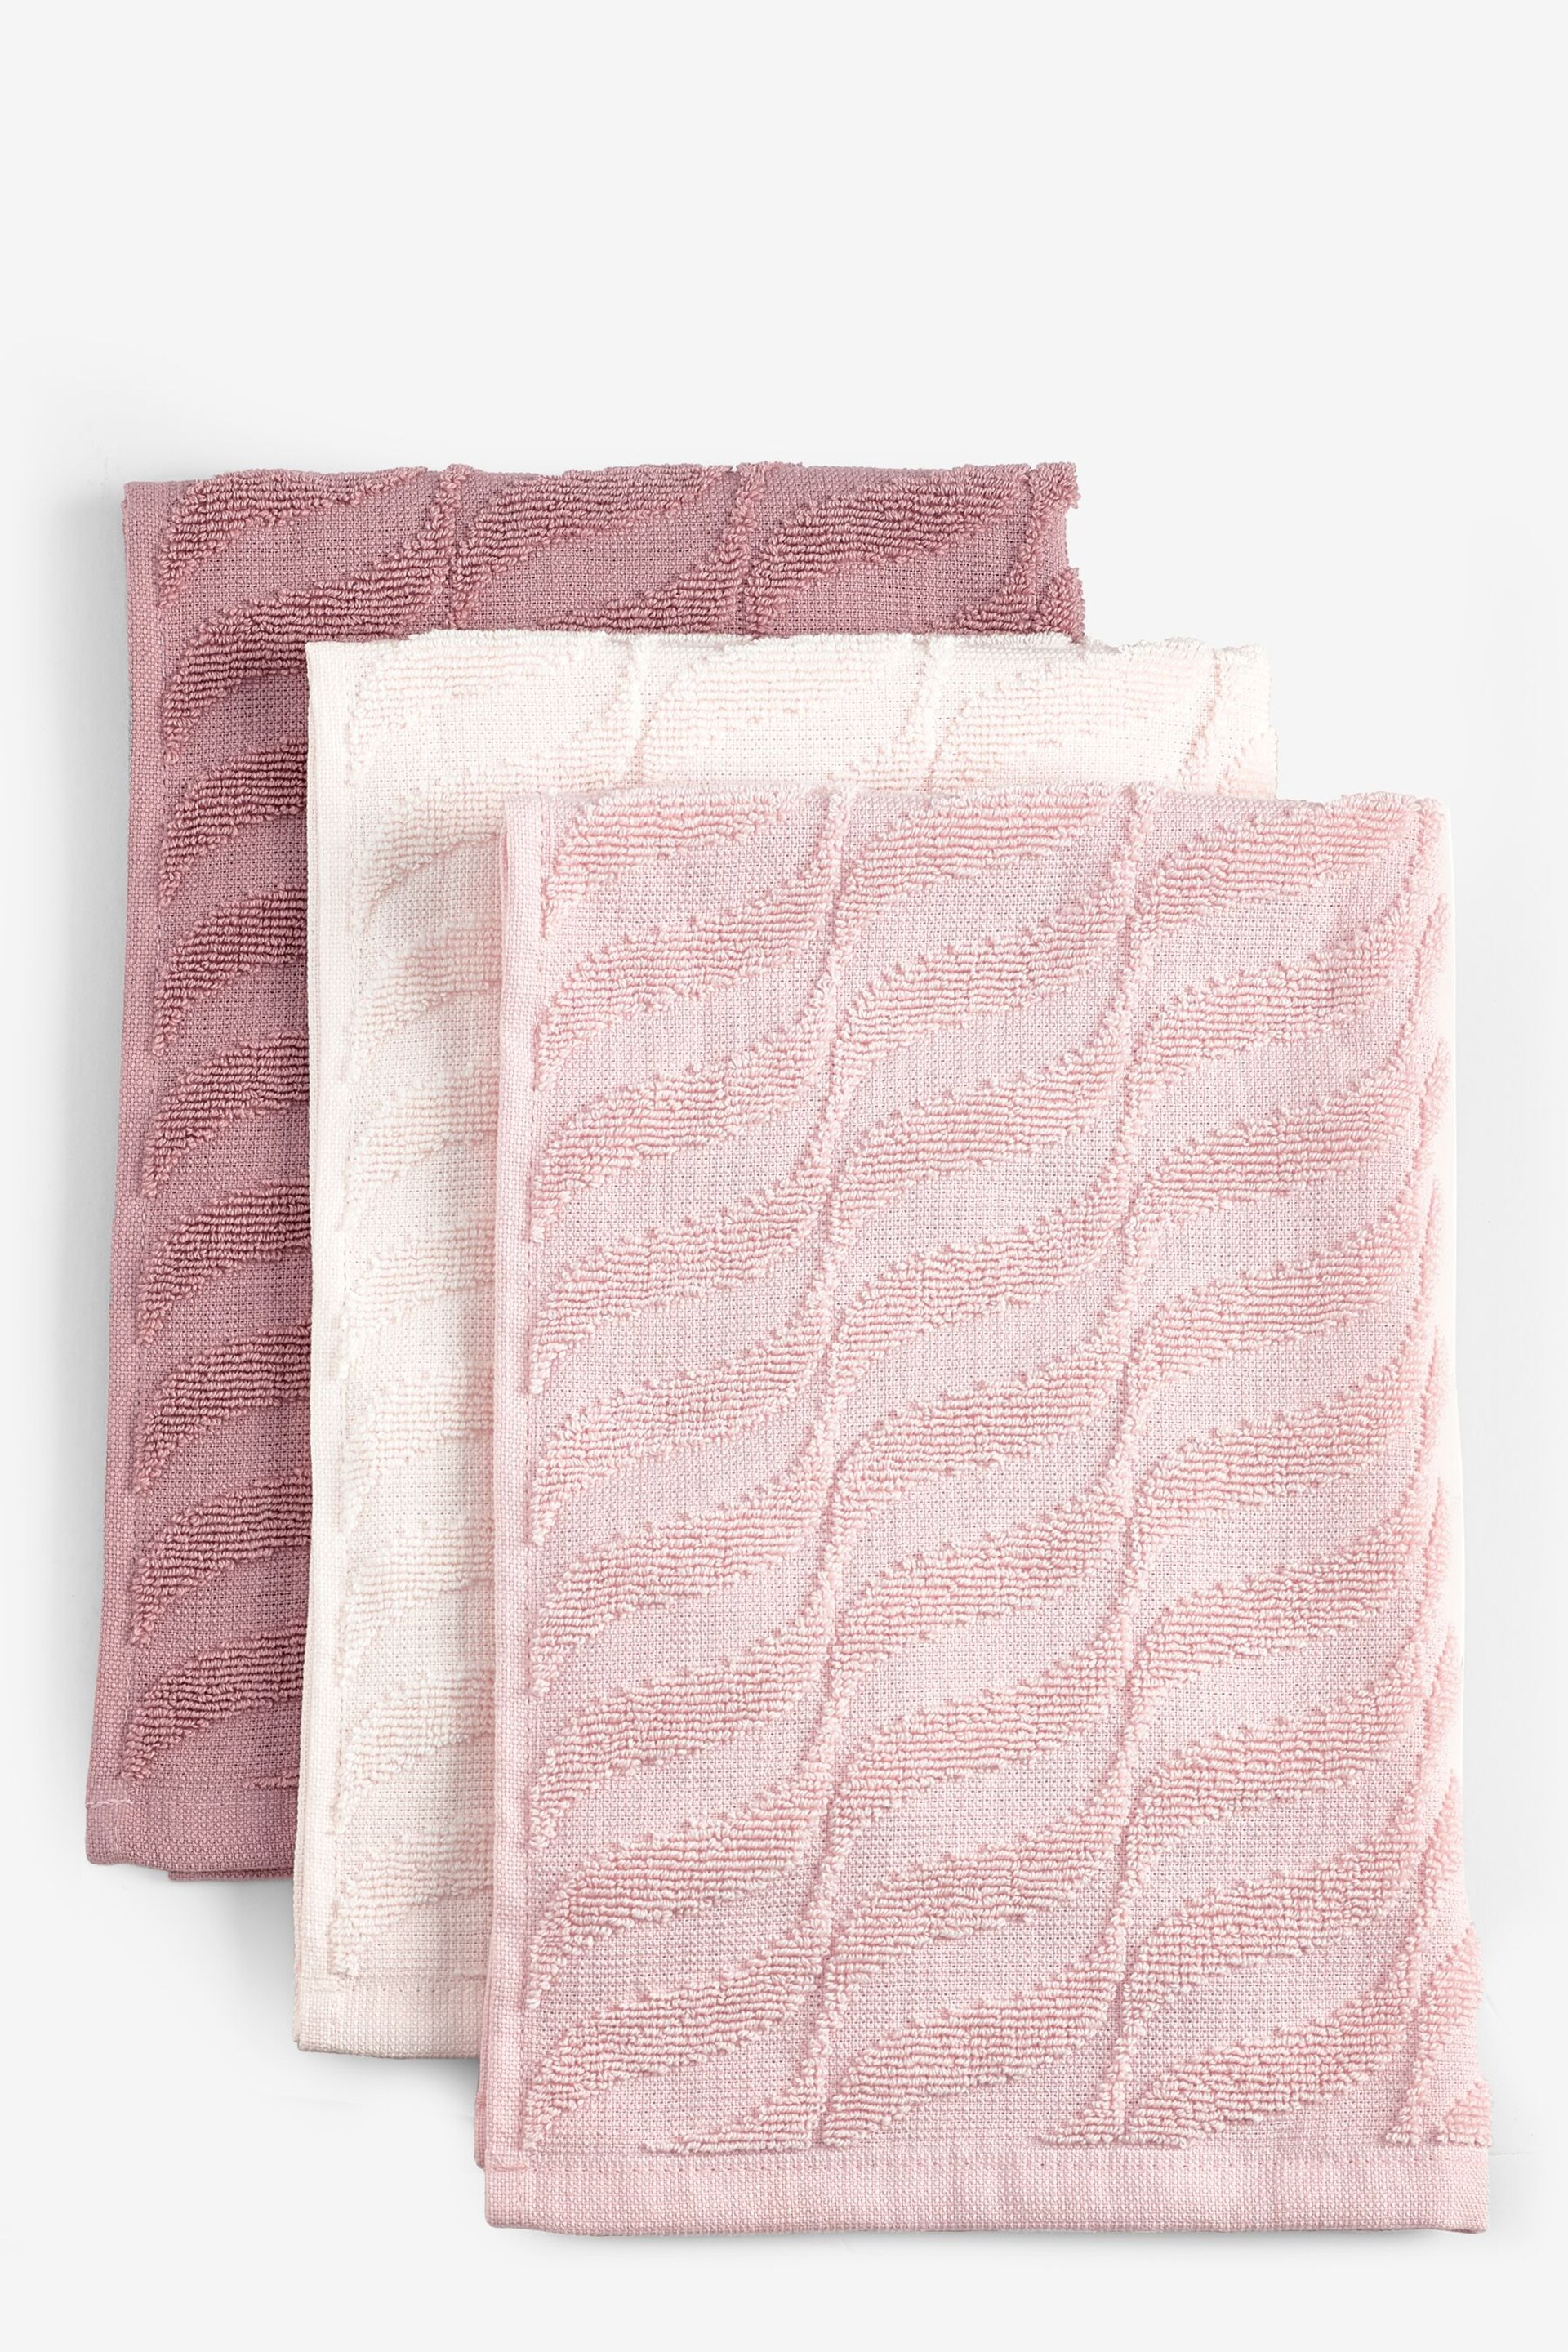 Set of 3 Pink Terry Tea Towels - Image 4 of 4